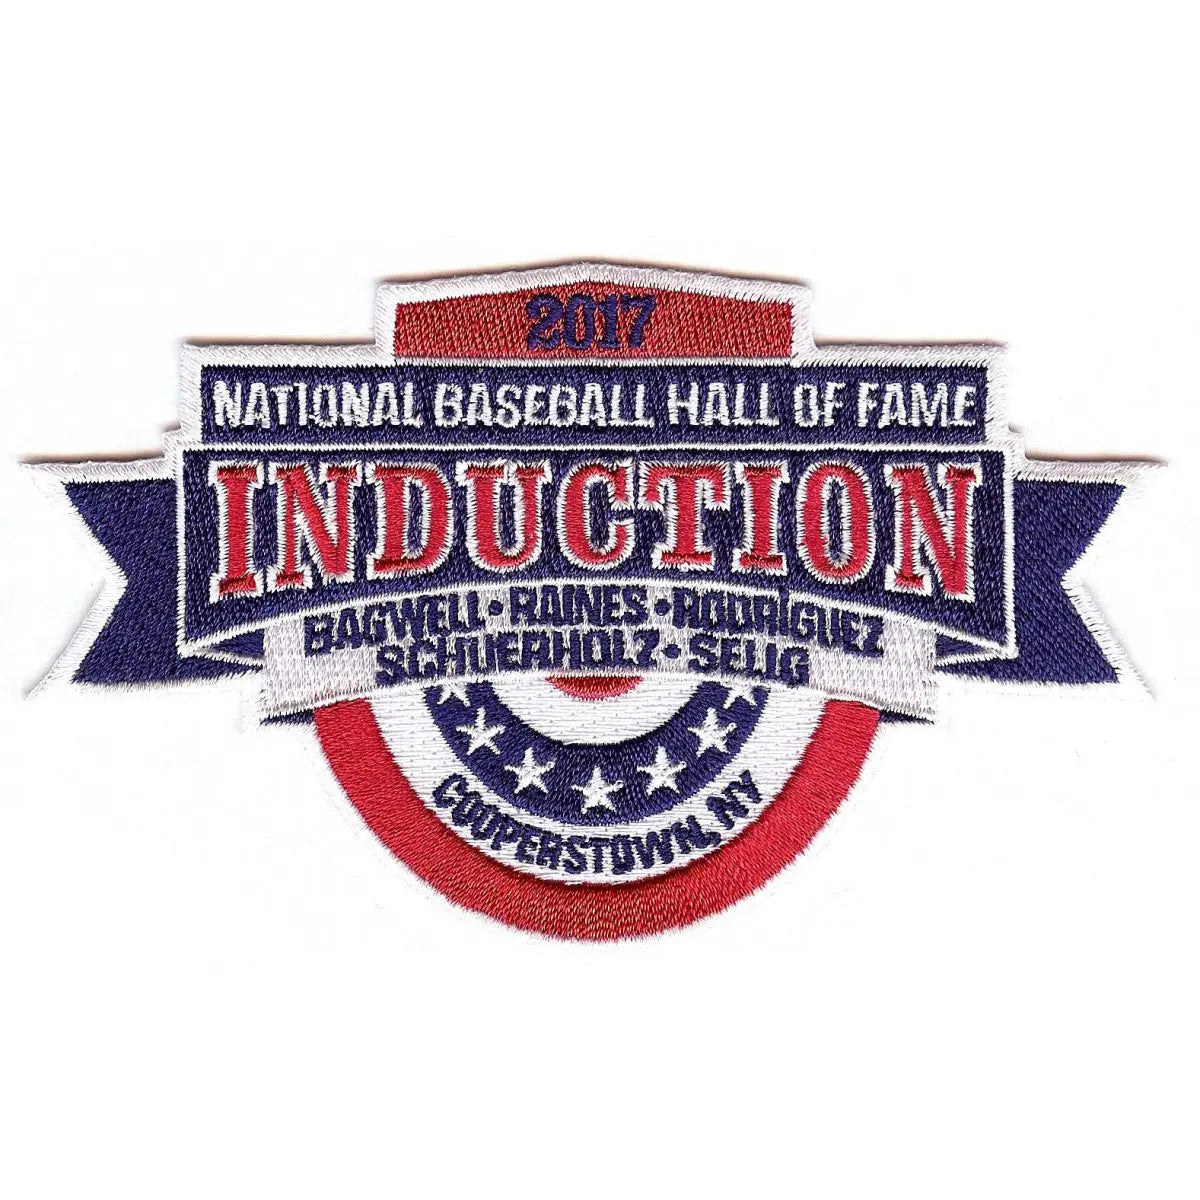 2017 National Baseball Hall of Fame Induction Patch Bagwell Rodríguez Raines 